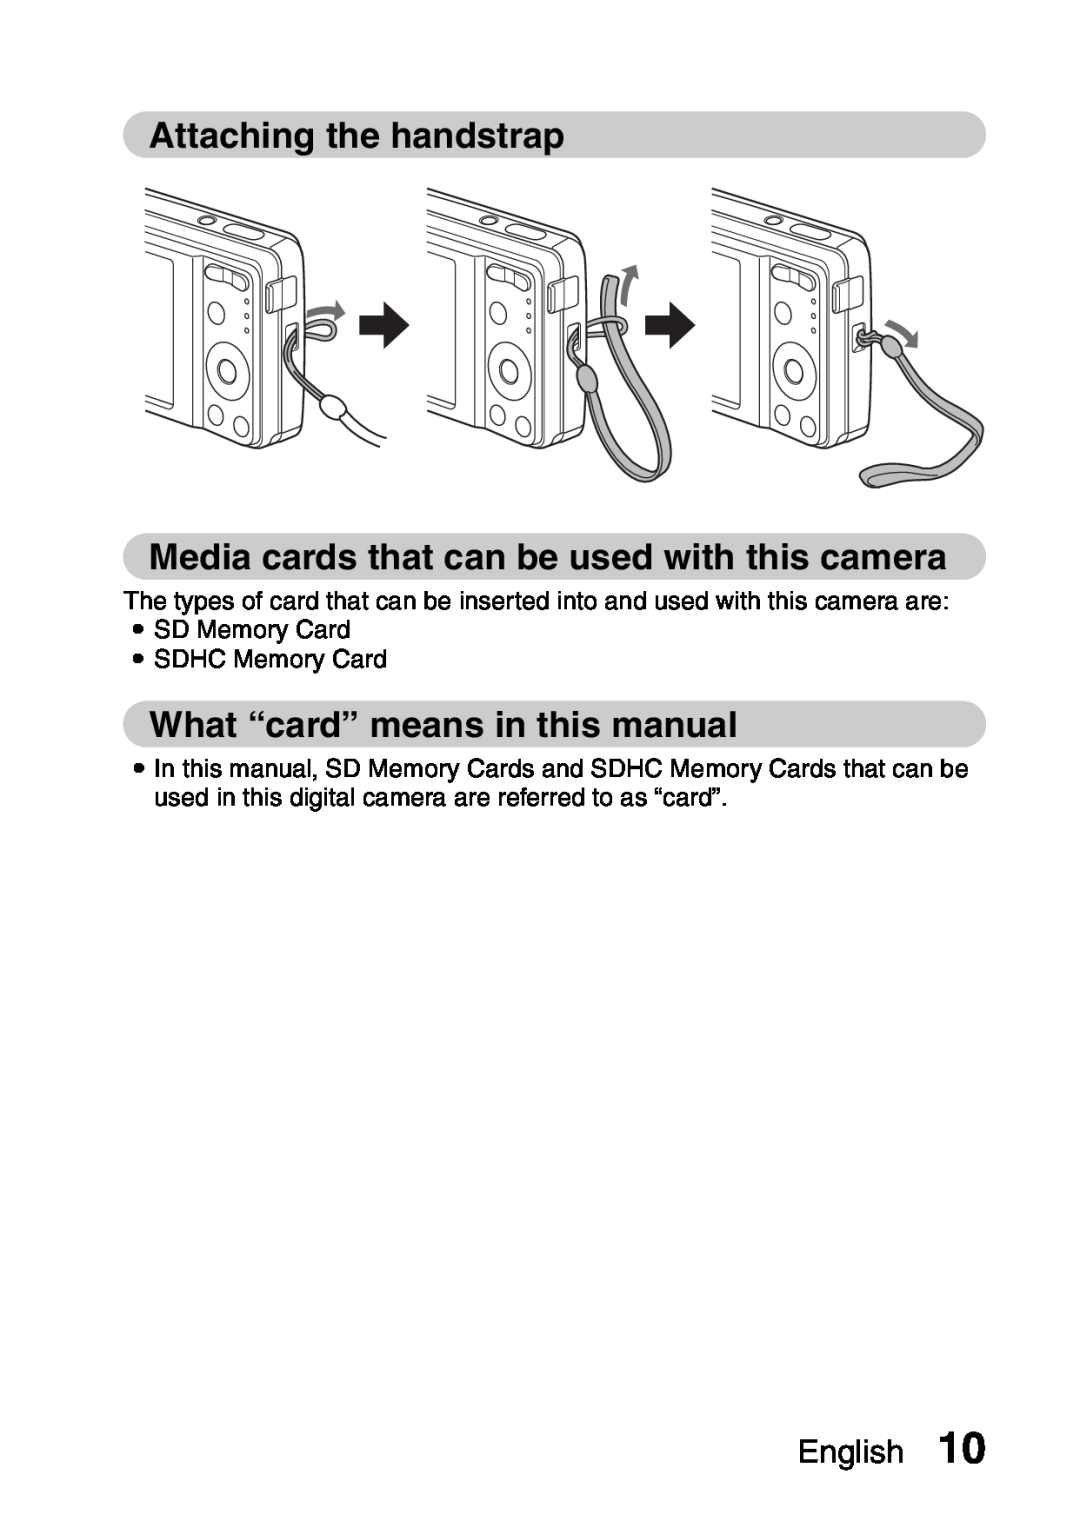 Samsung R50 Attaching the handstrap Media cards that can be used with this camera, What “card” means in this manual 